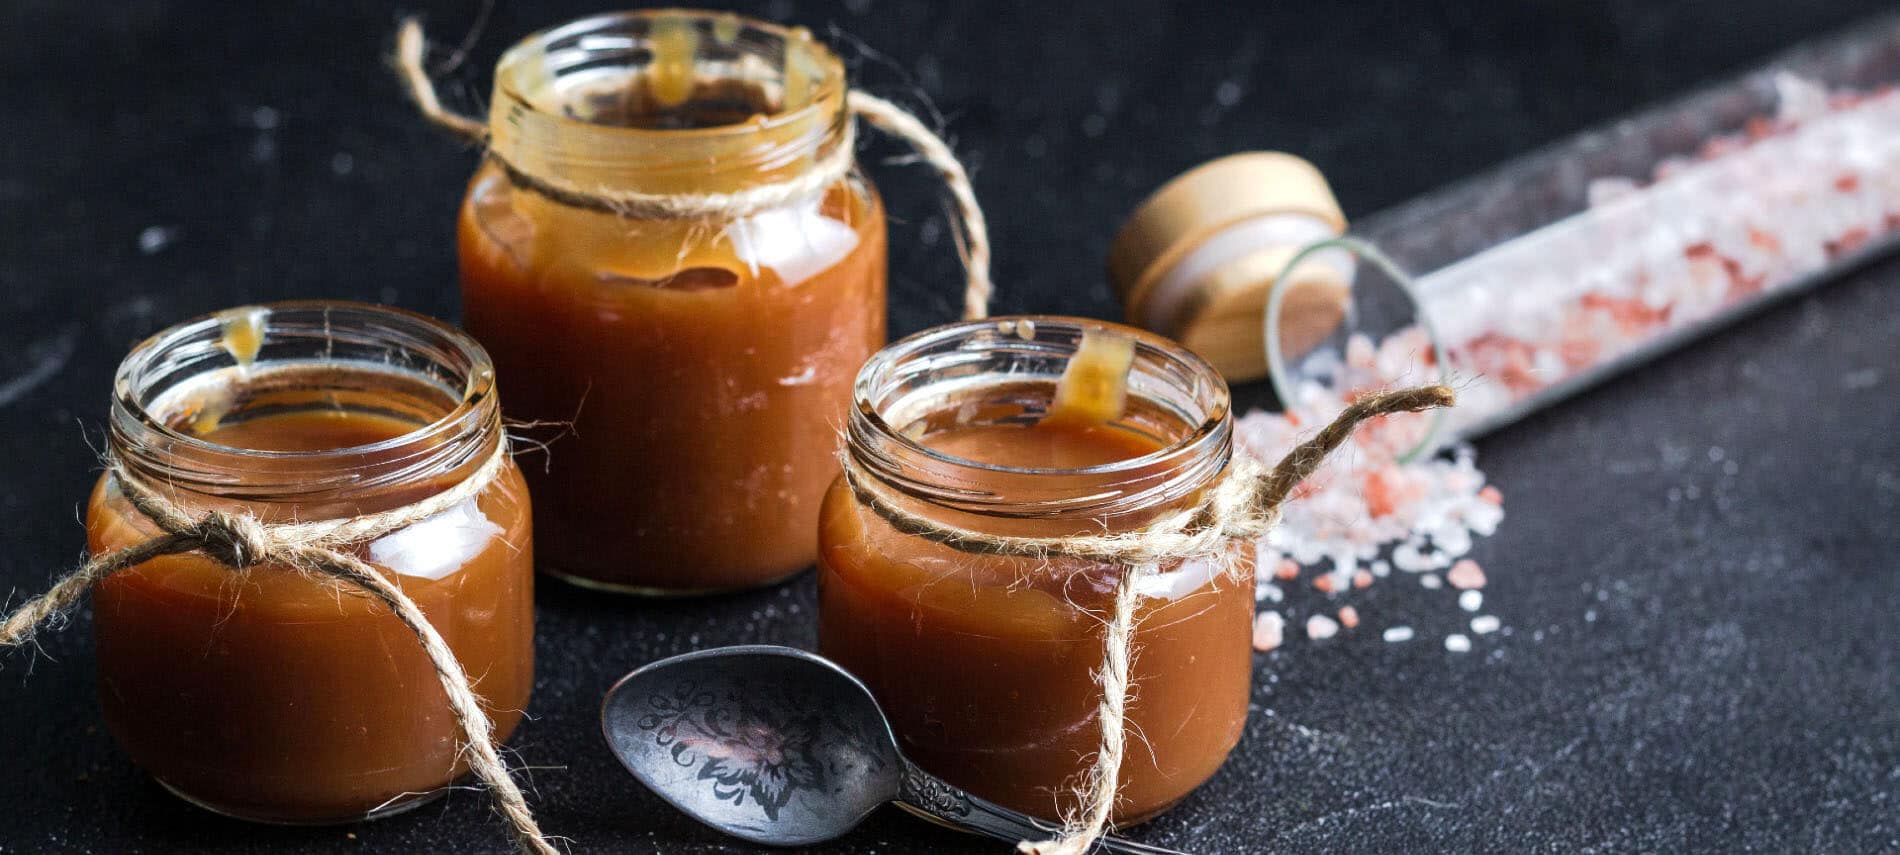 jars of caramel sauce with twine and a spoon, along with chunky sea salt